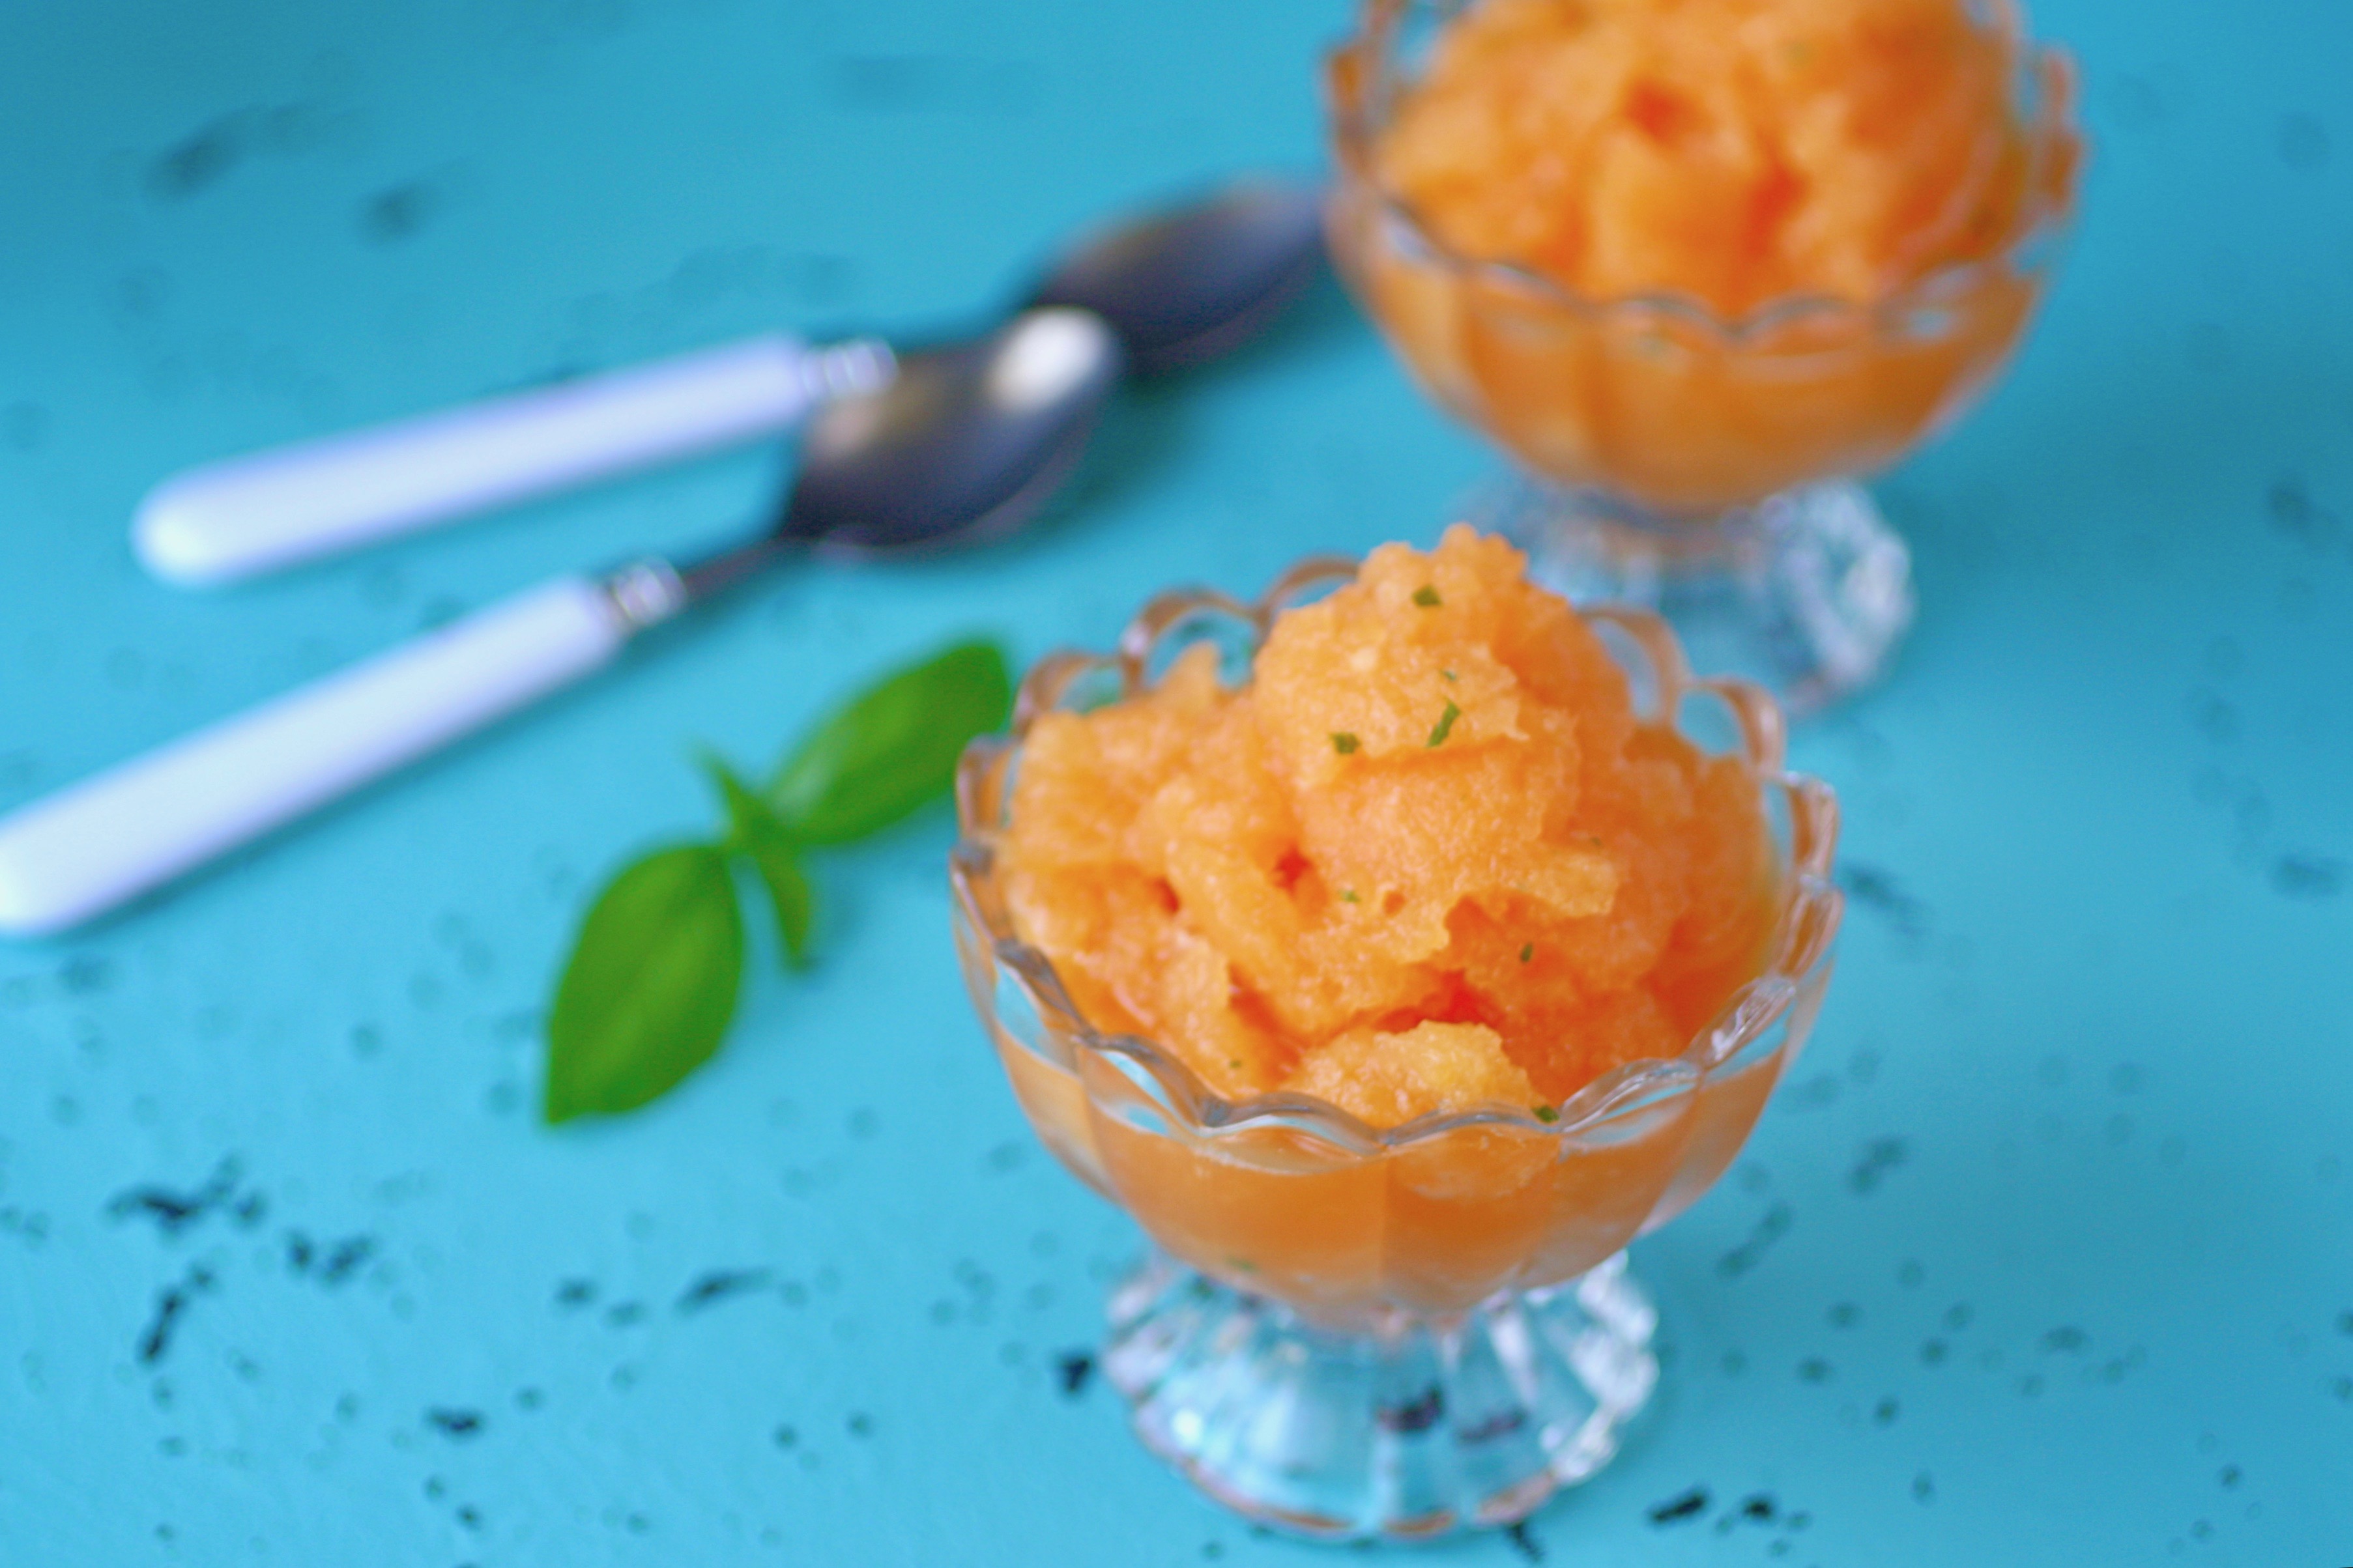 Cantaloupe-Basil Granita is refreshing and fun for the summer! Cantaloupe-Basil Granita is the perfect after-dinner treat this summer!